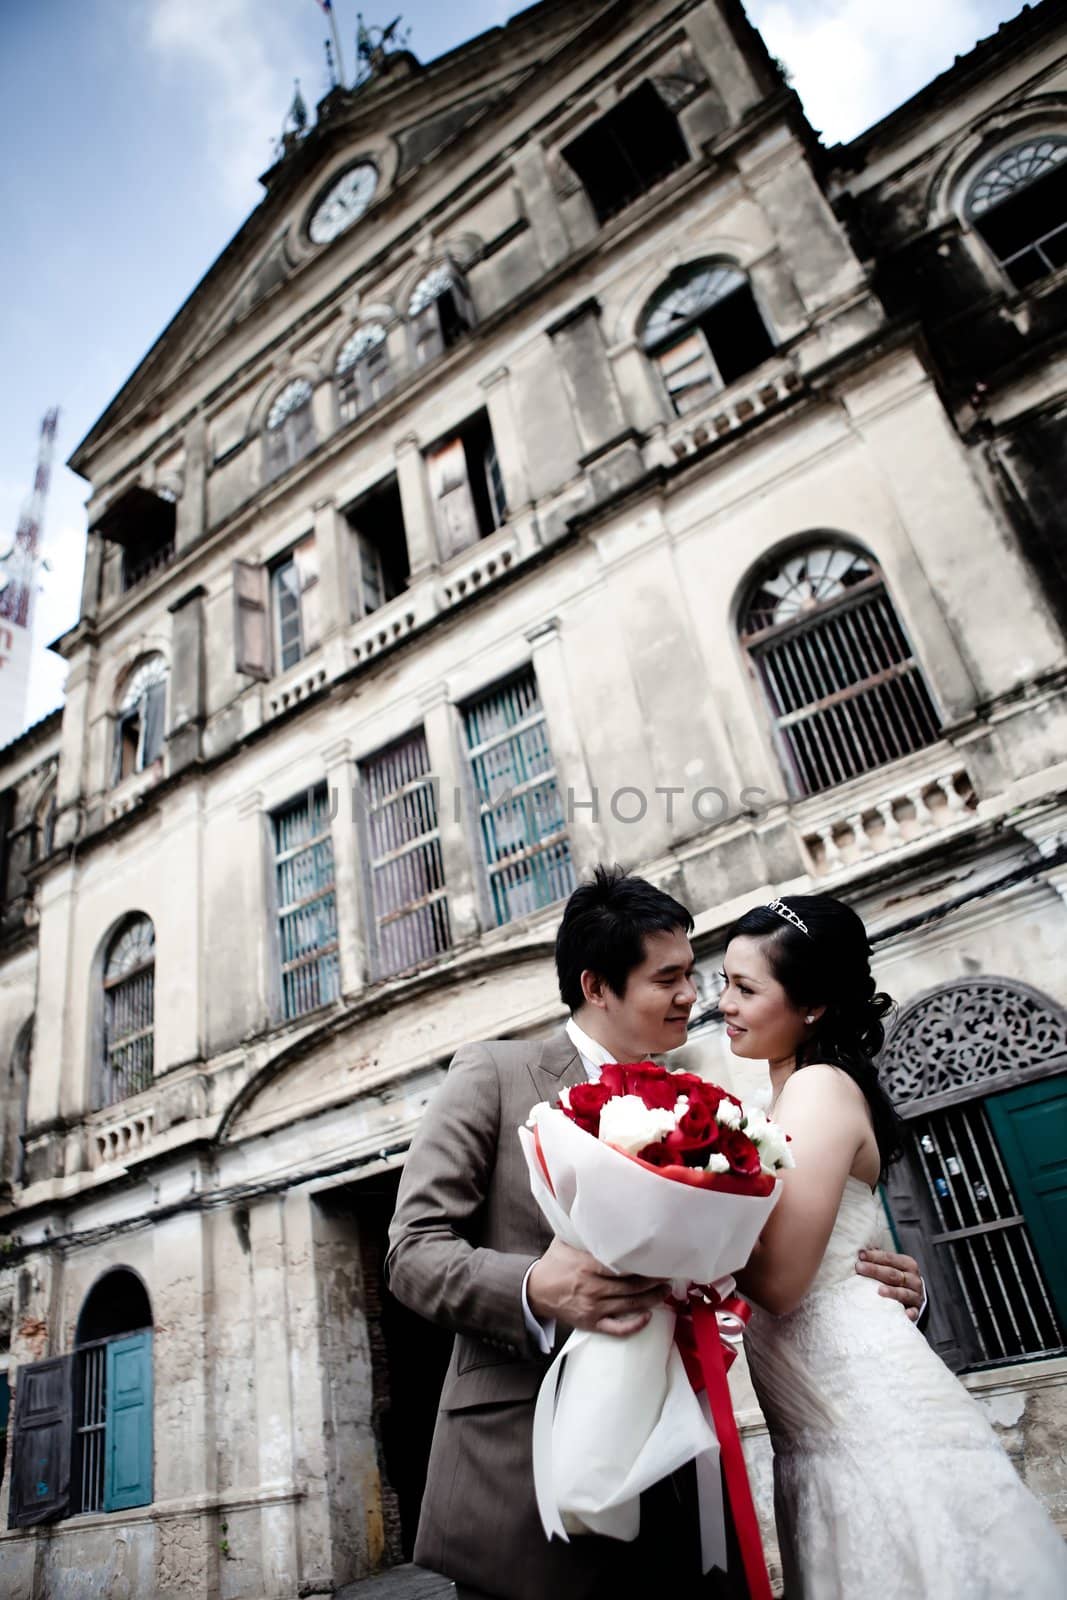 Bride and groom seeing each other at old building